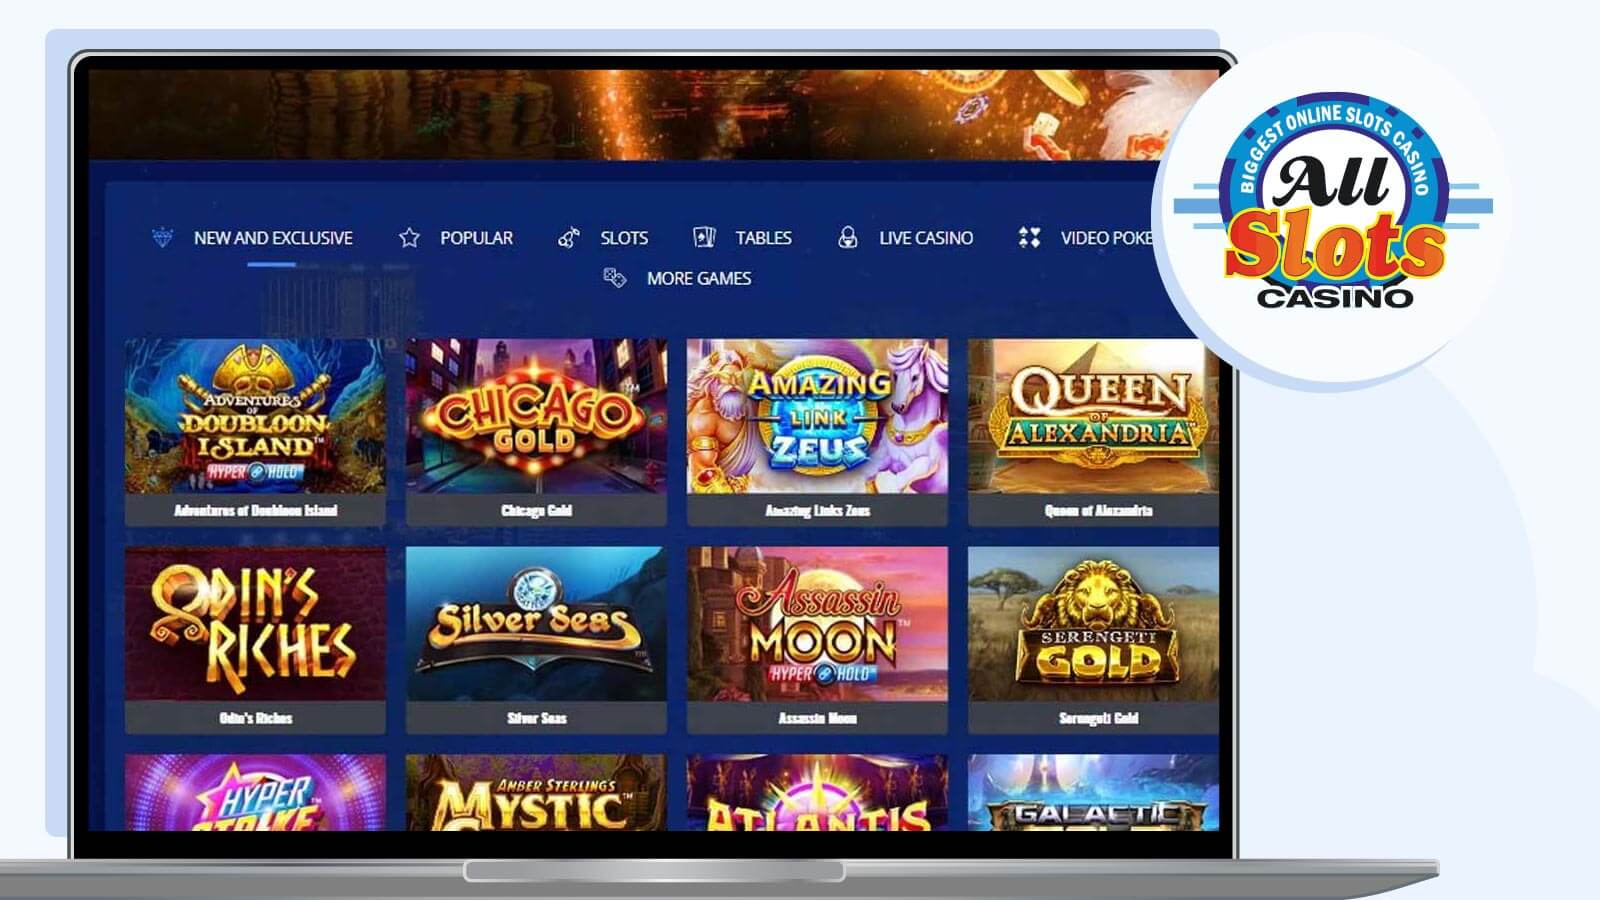 All-Slots-Casino-preview-game-lobby